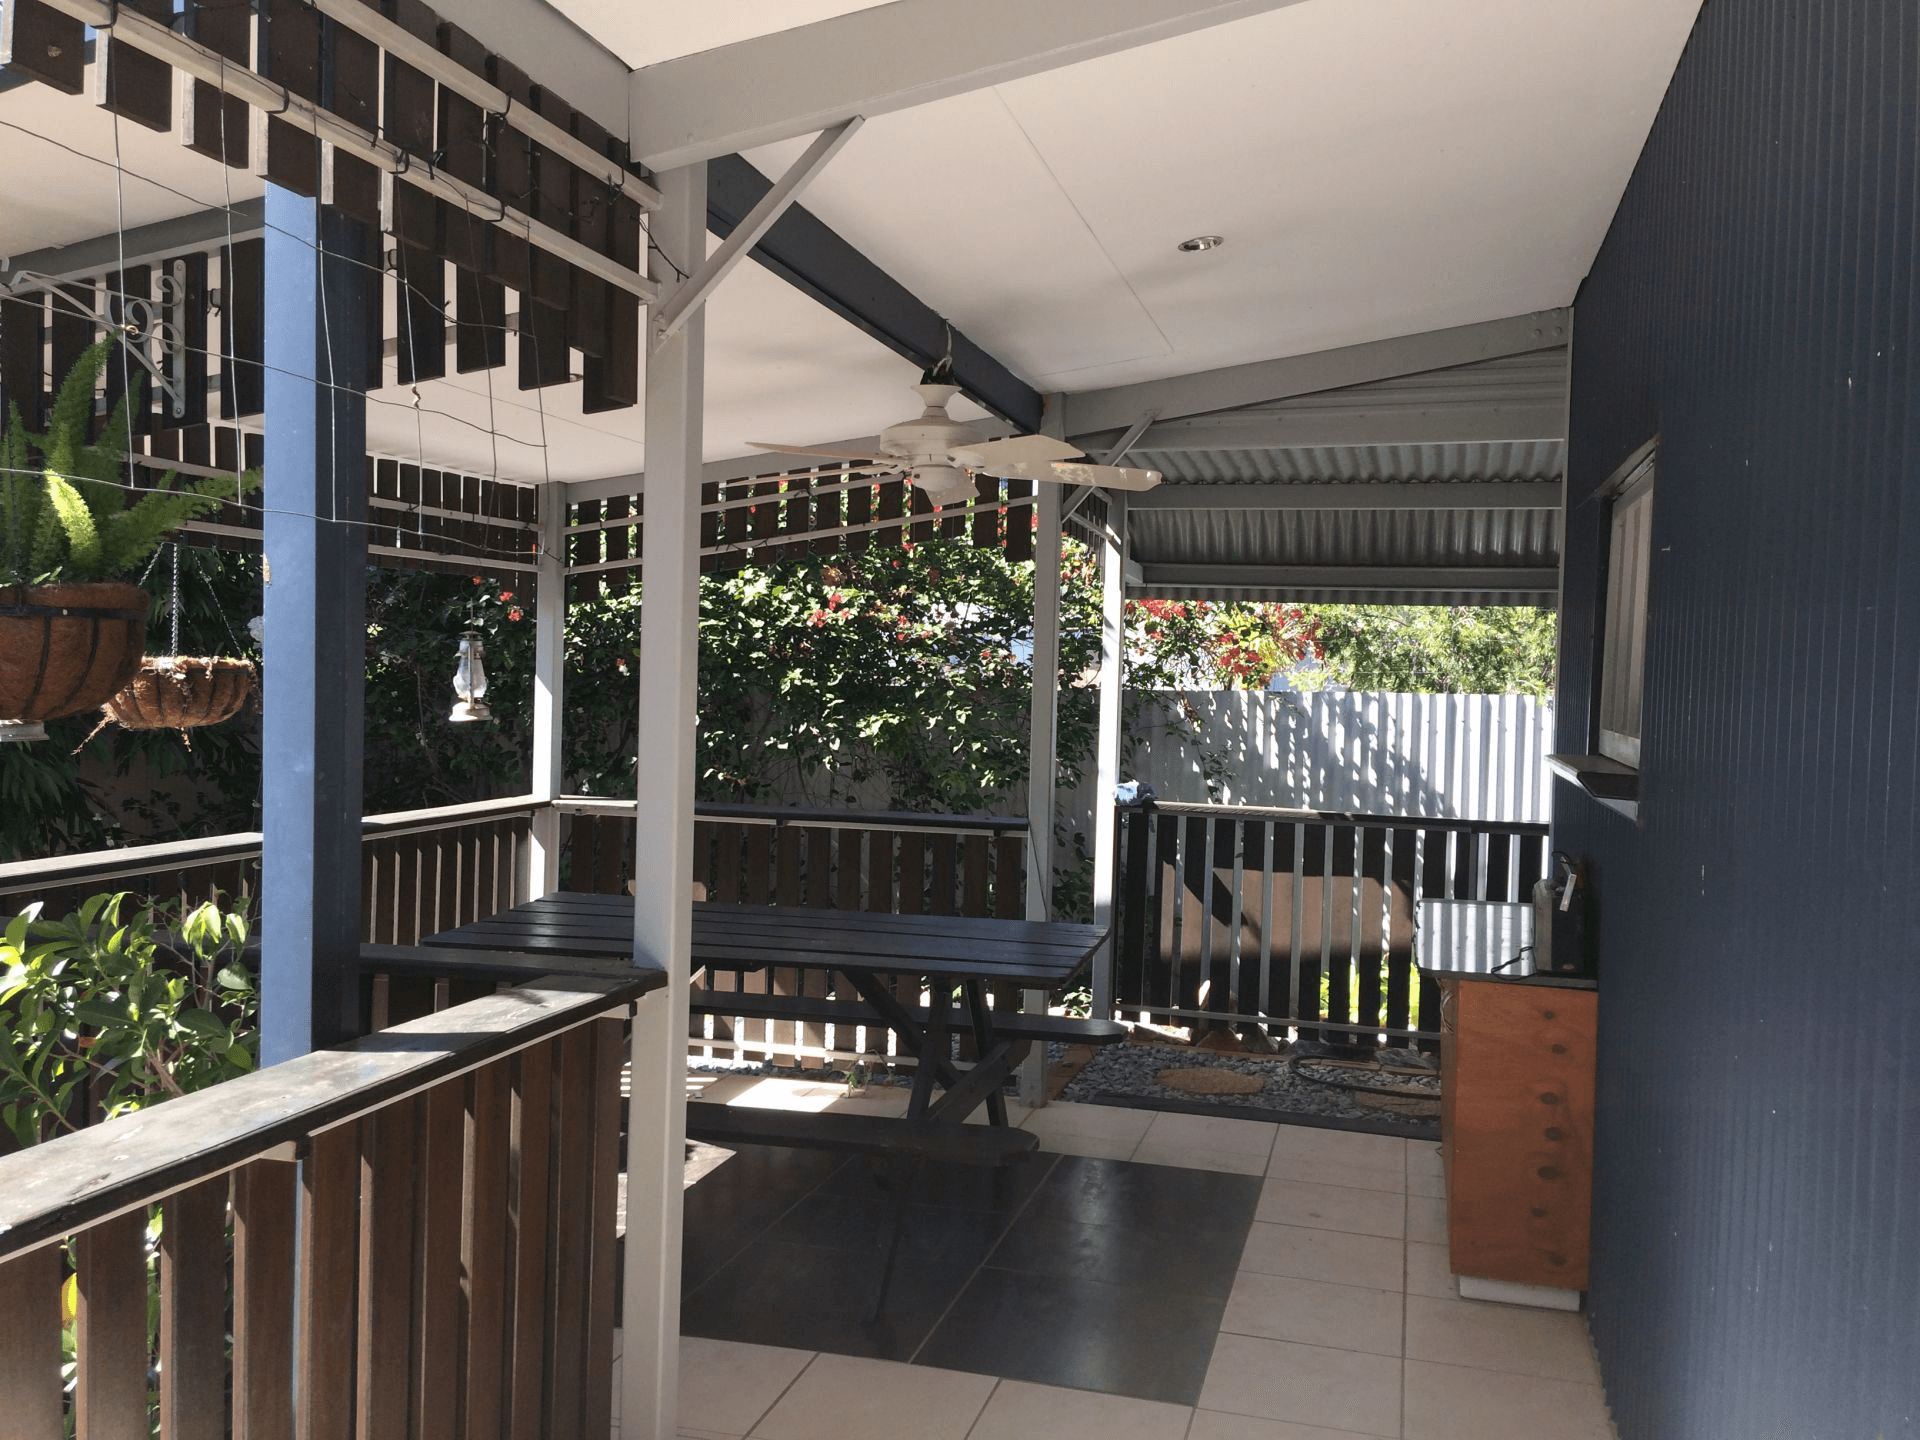 1-3 Tower St, CHILLAGOE, QLD 4871